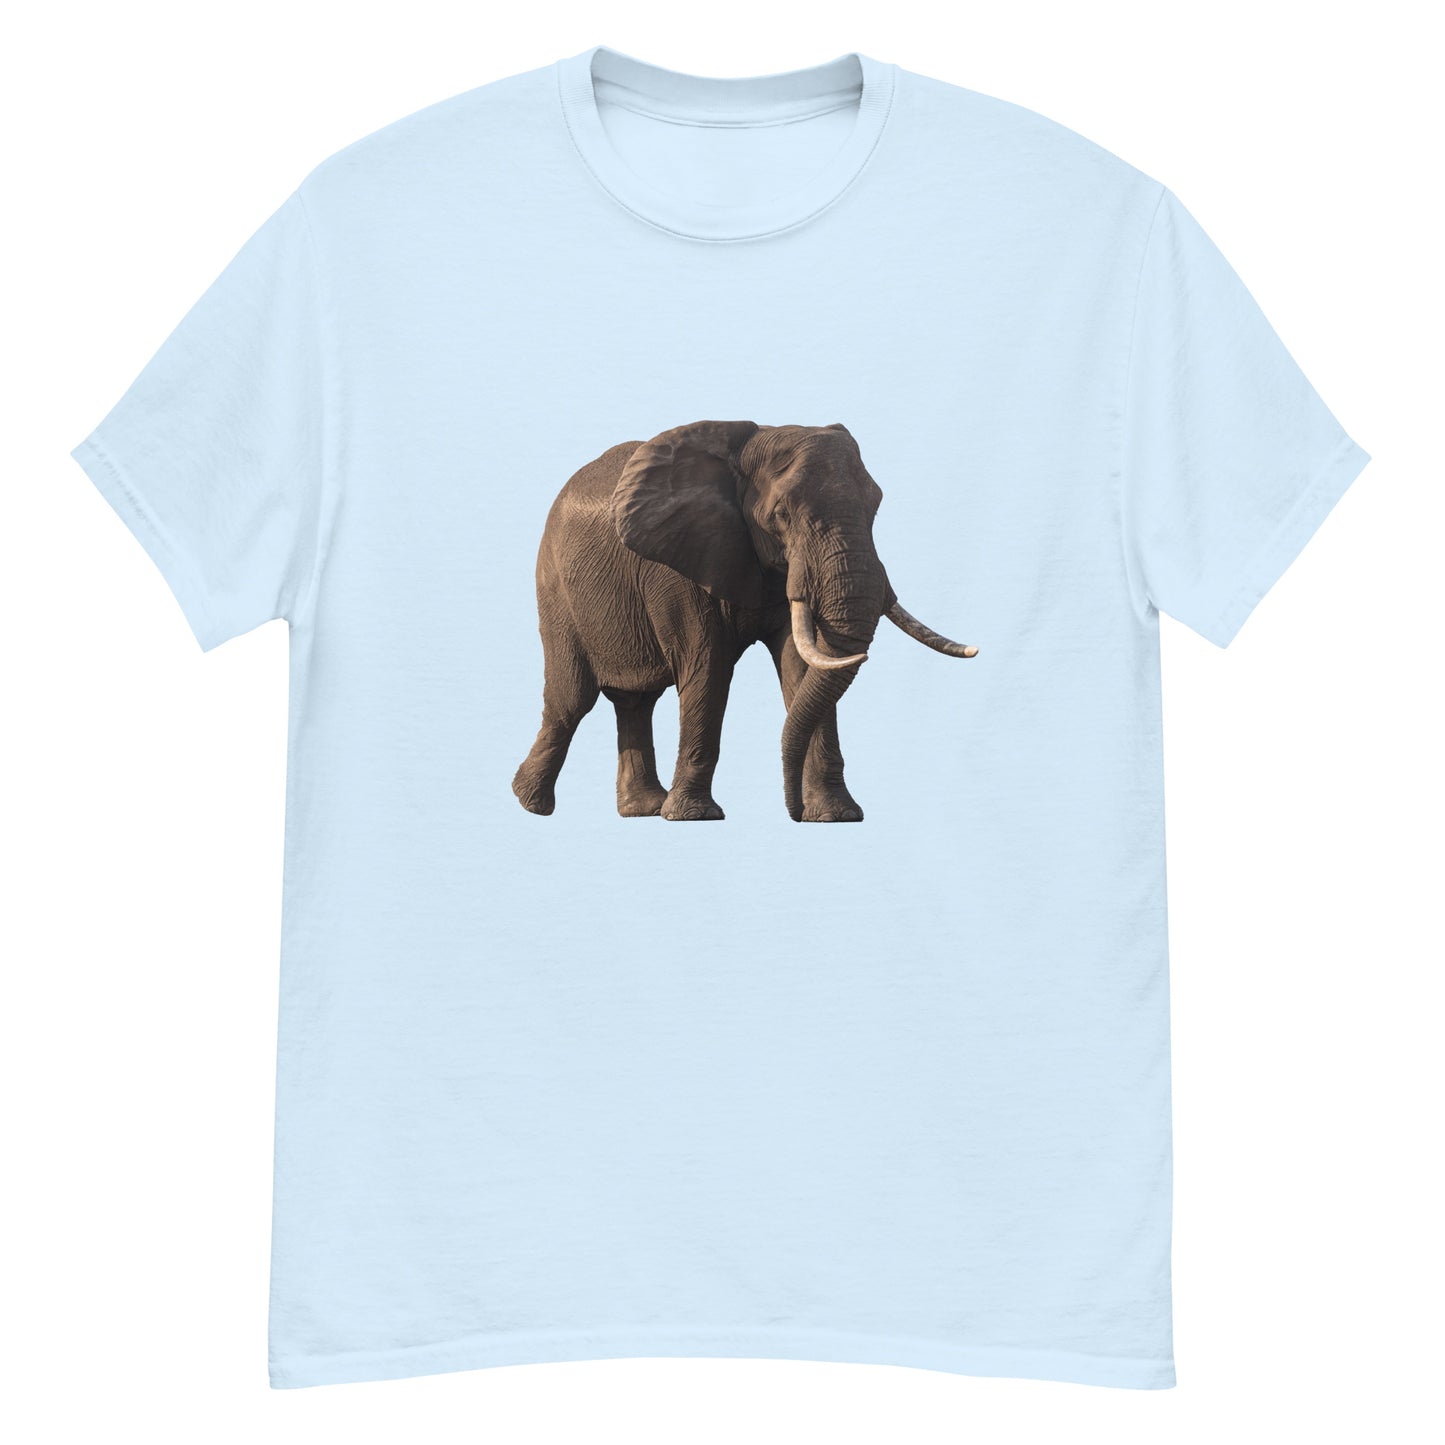 Mens T-shirt  printed with a Bull Elephant